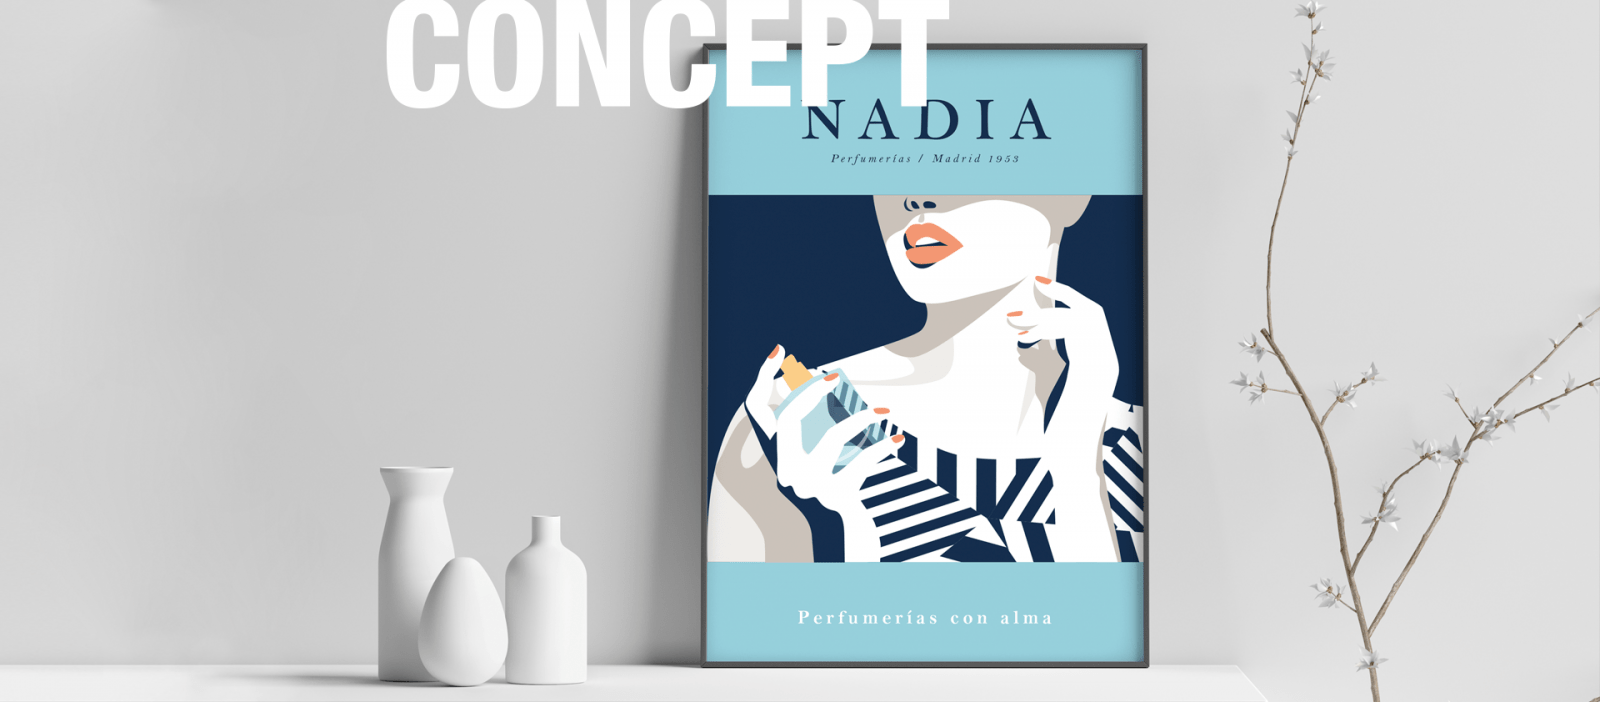 NADIAview project